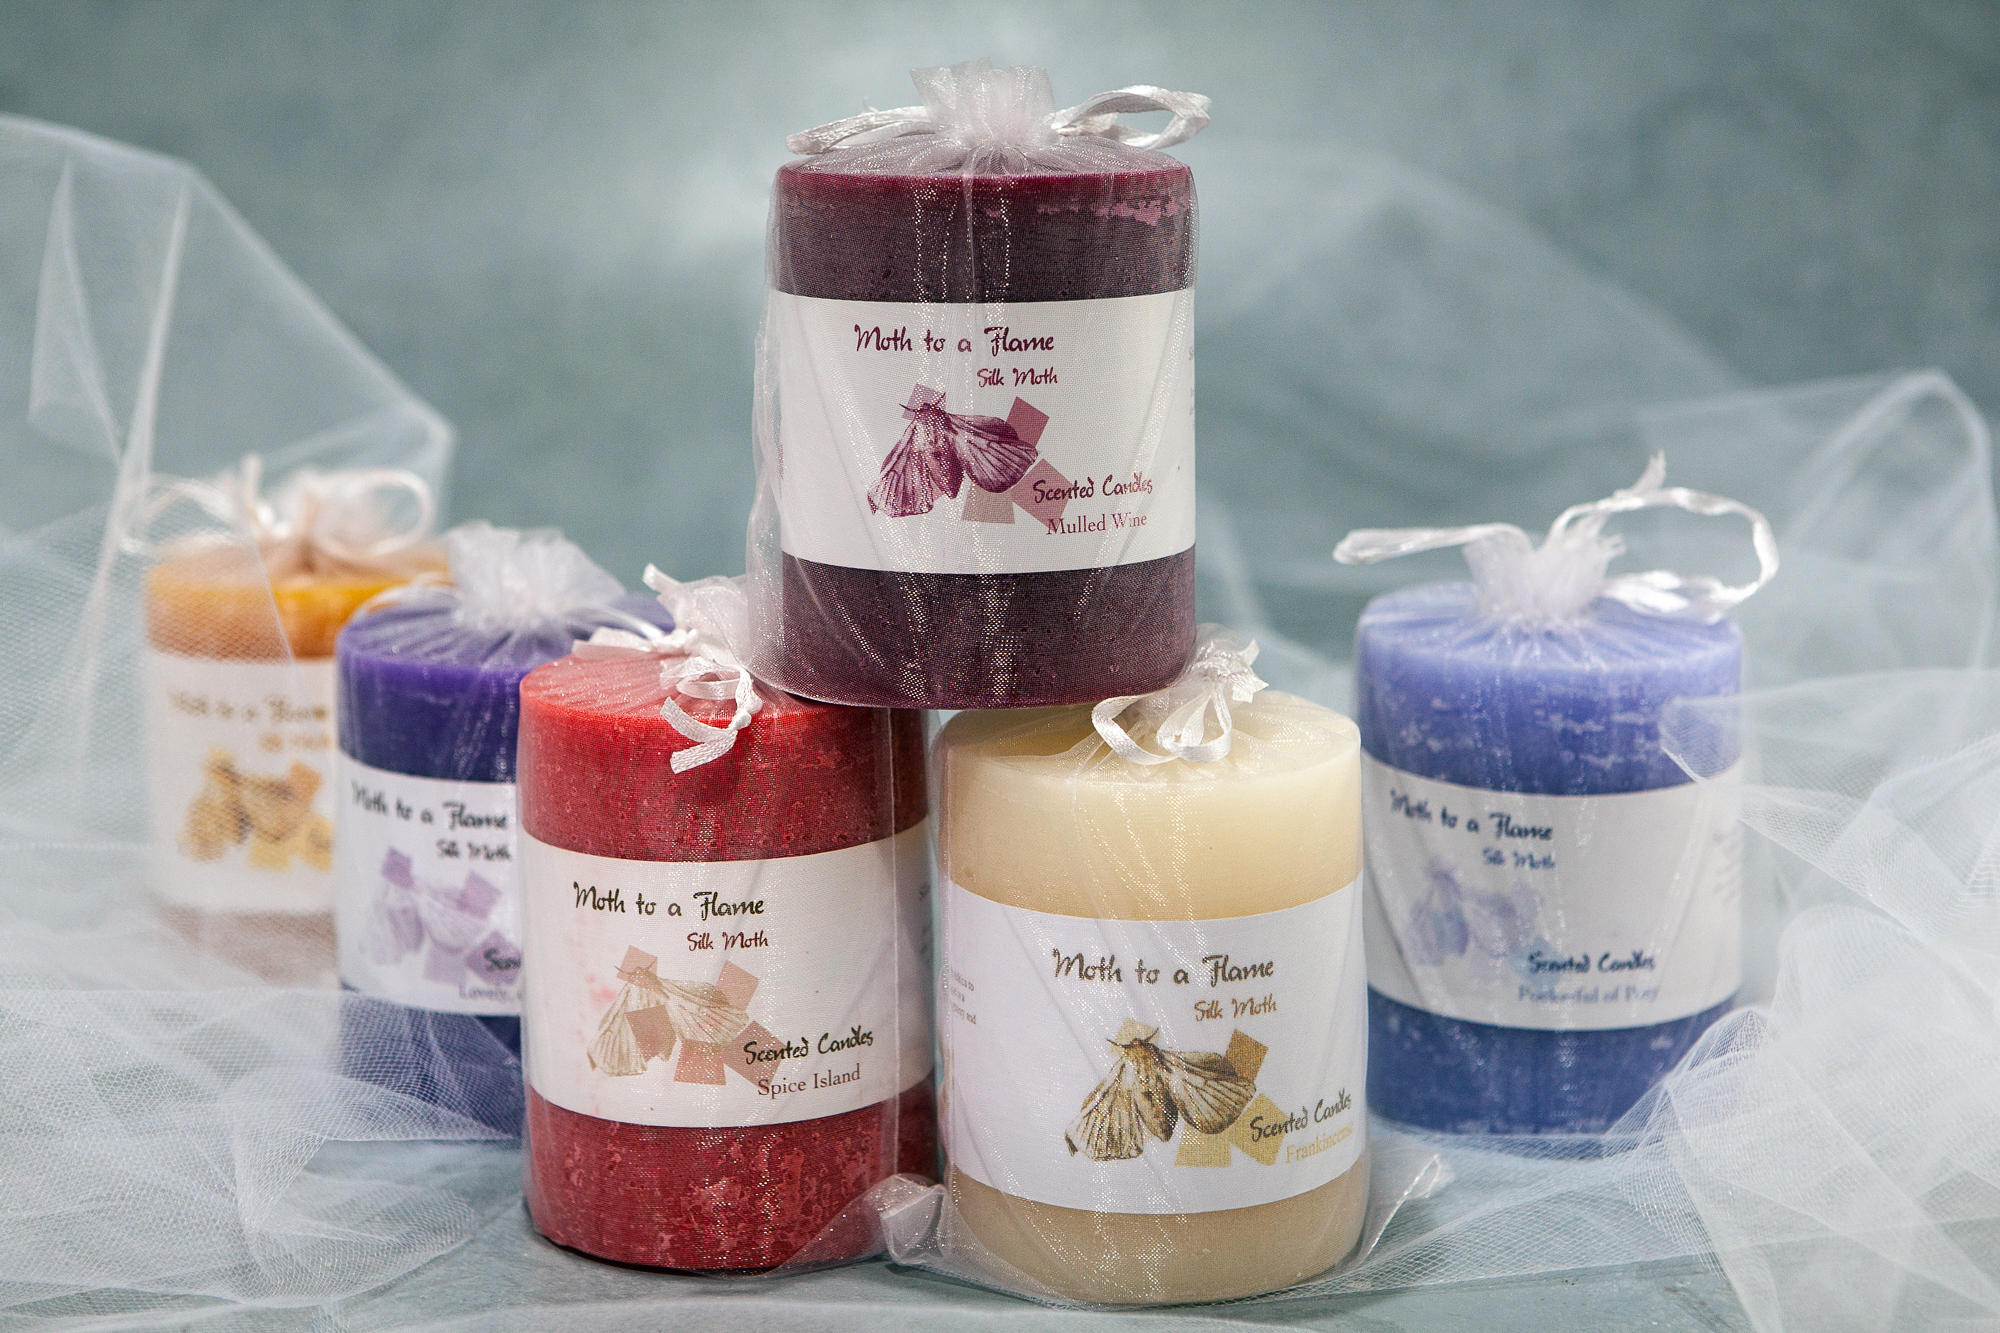 scented candles, hand made, kilkenny, ireland